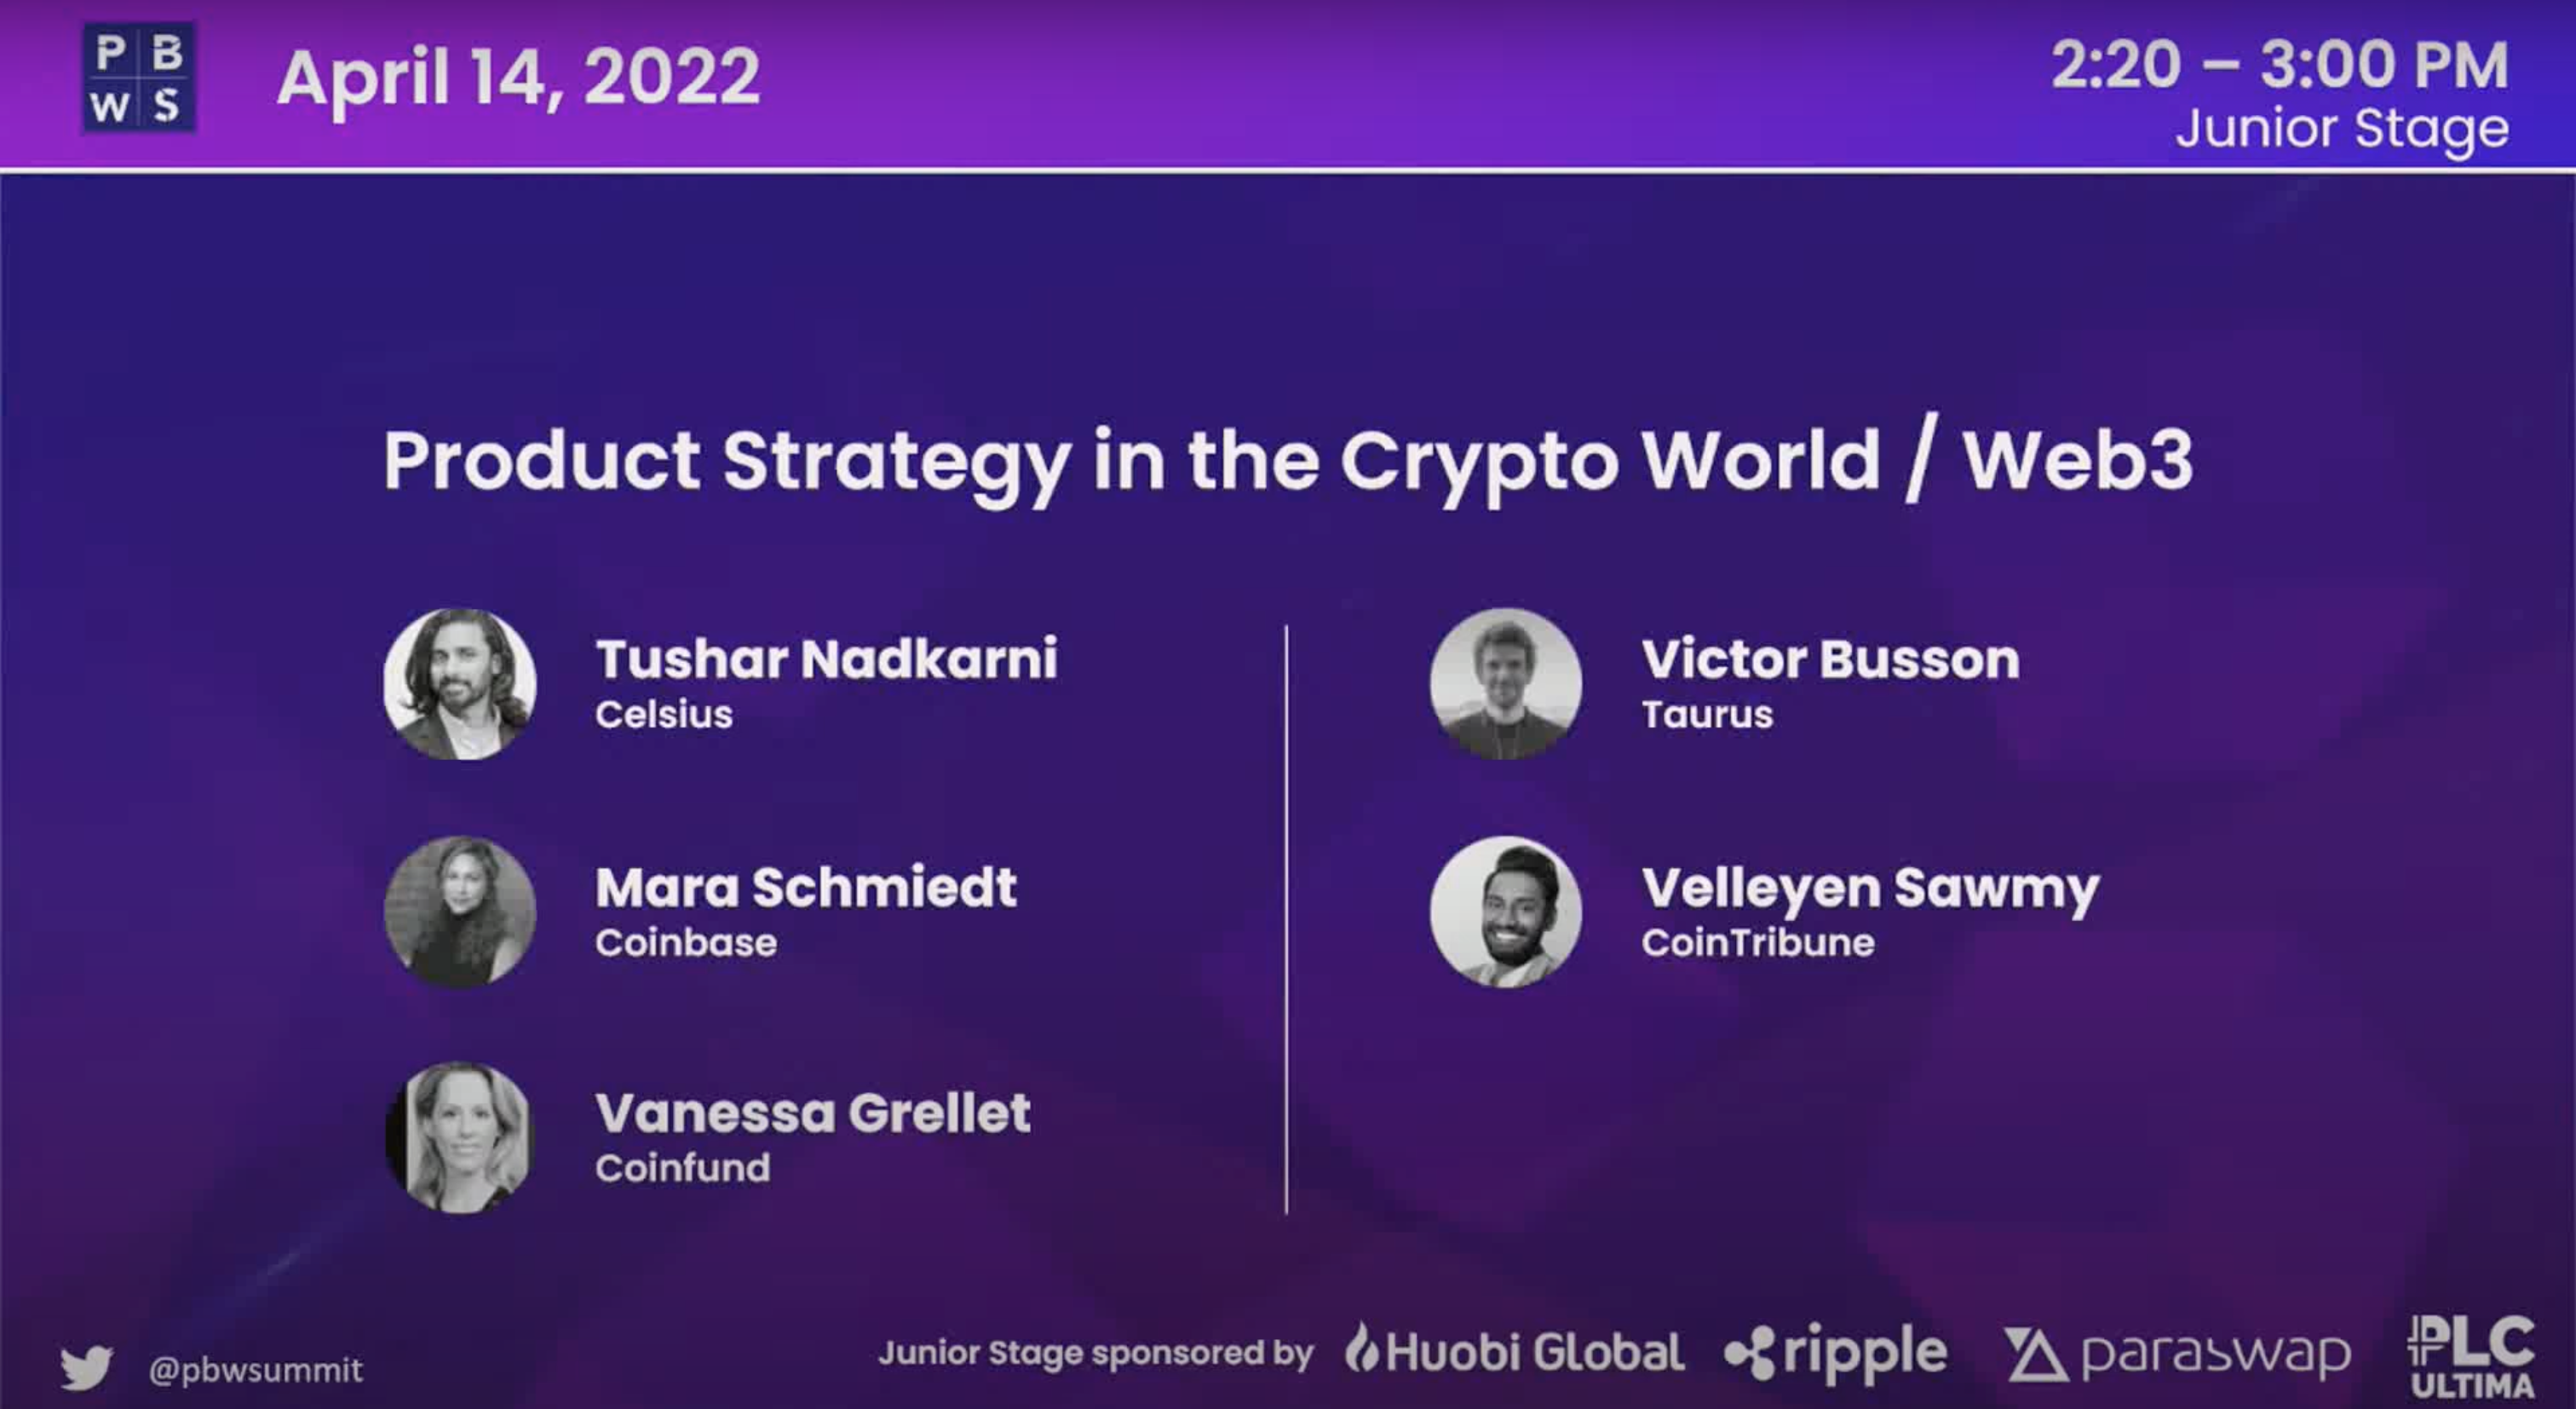 product strategy in the crypto world and web 3